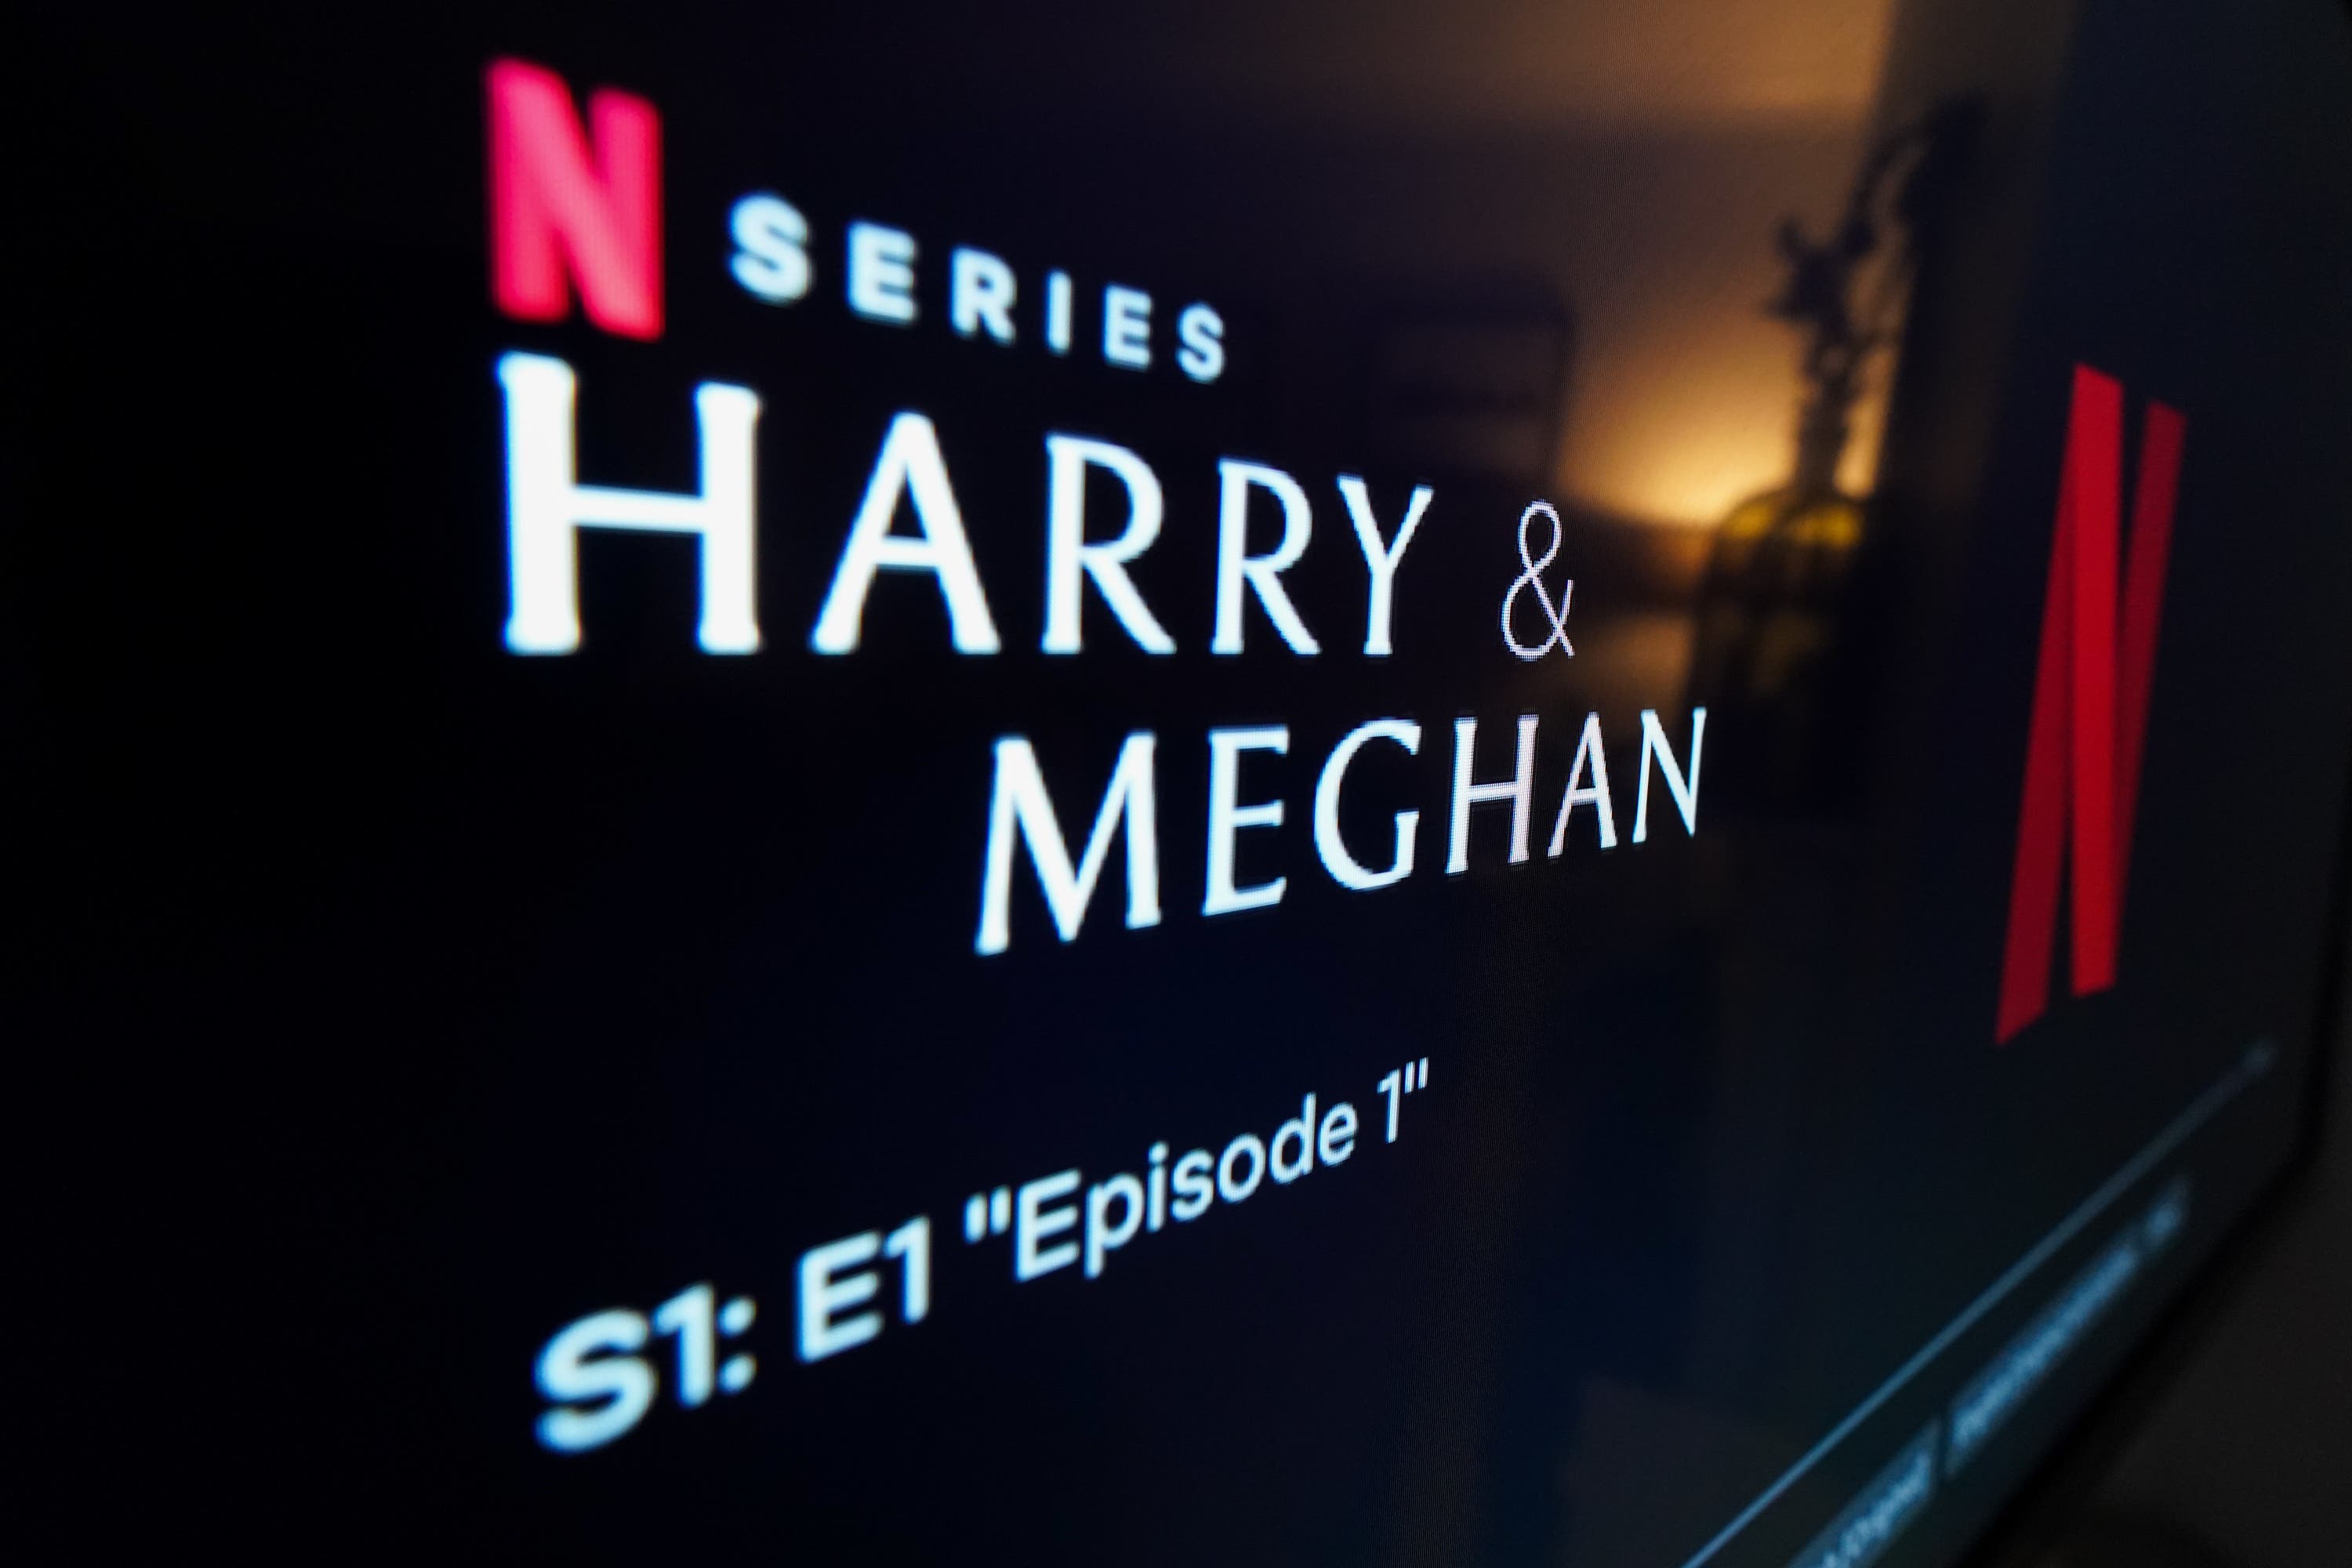 Harry & Meghan Part II will be available on Netflix from December 15